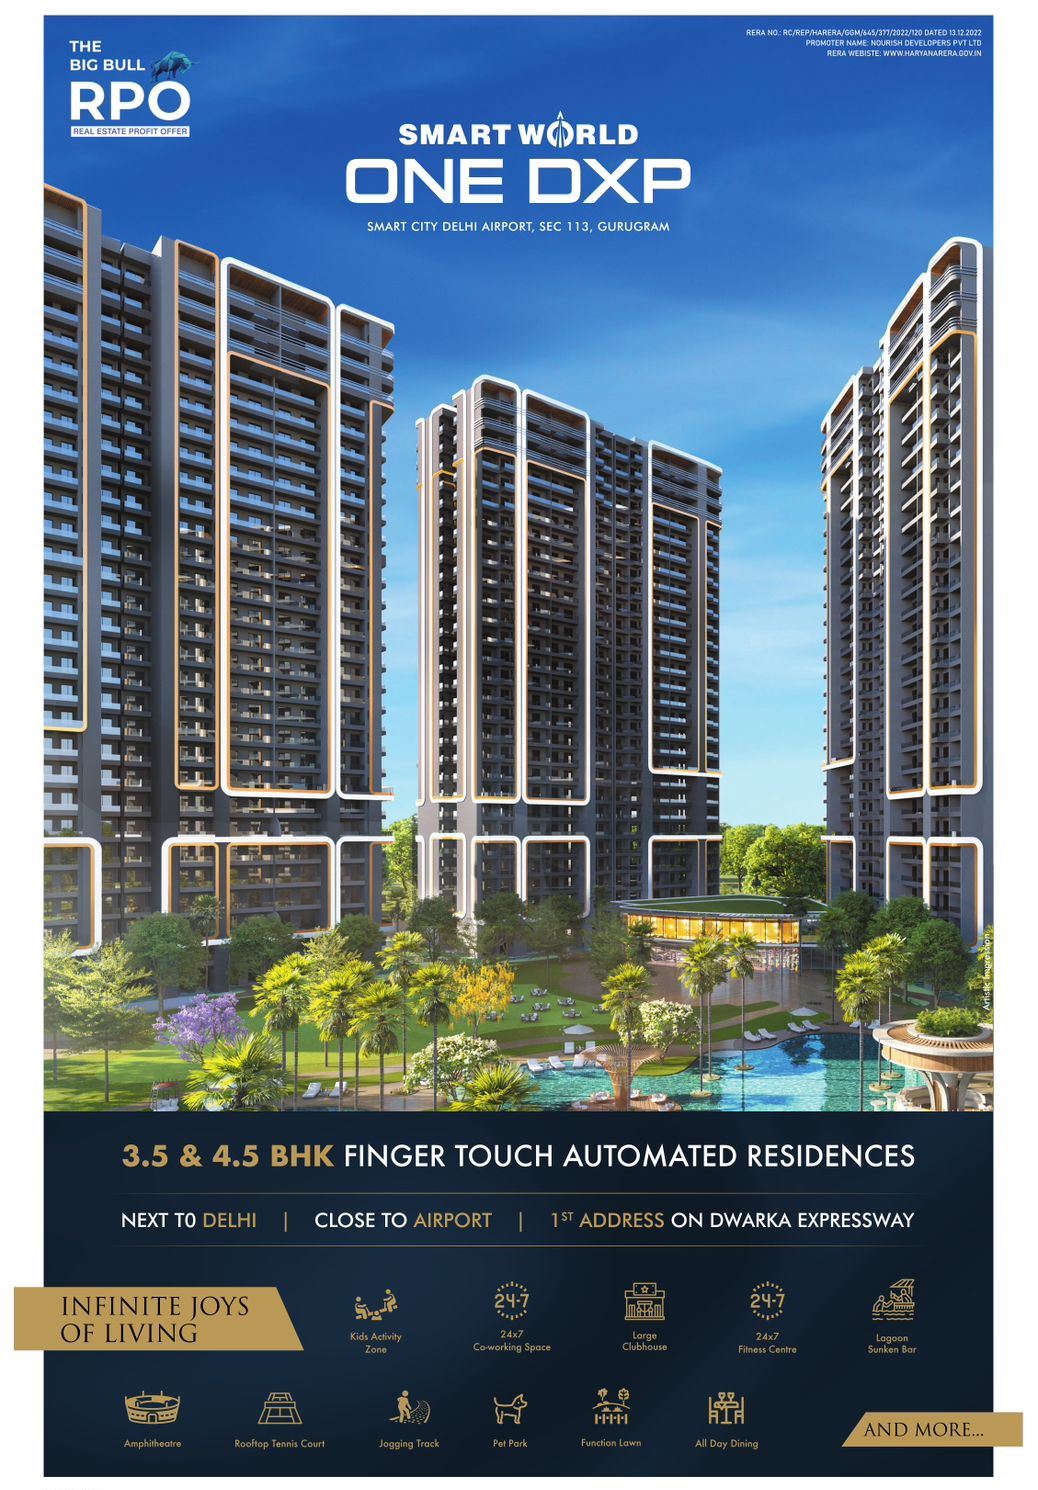 Book 3.5 and 4.5 BHK finger touch automated residences at Smart World One DXP in Sector 113, Gurgaon